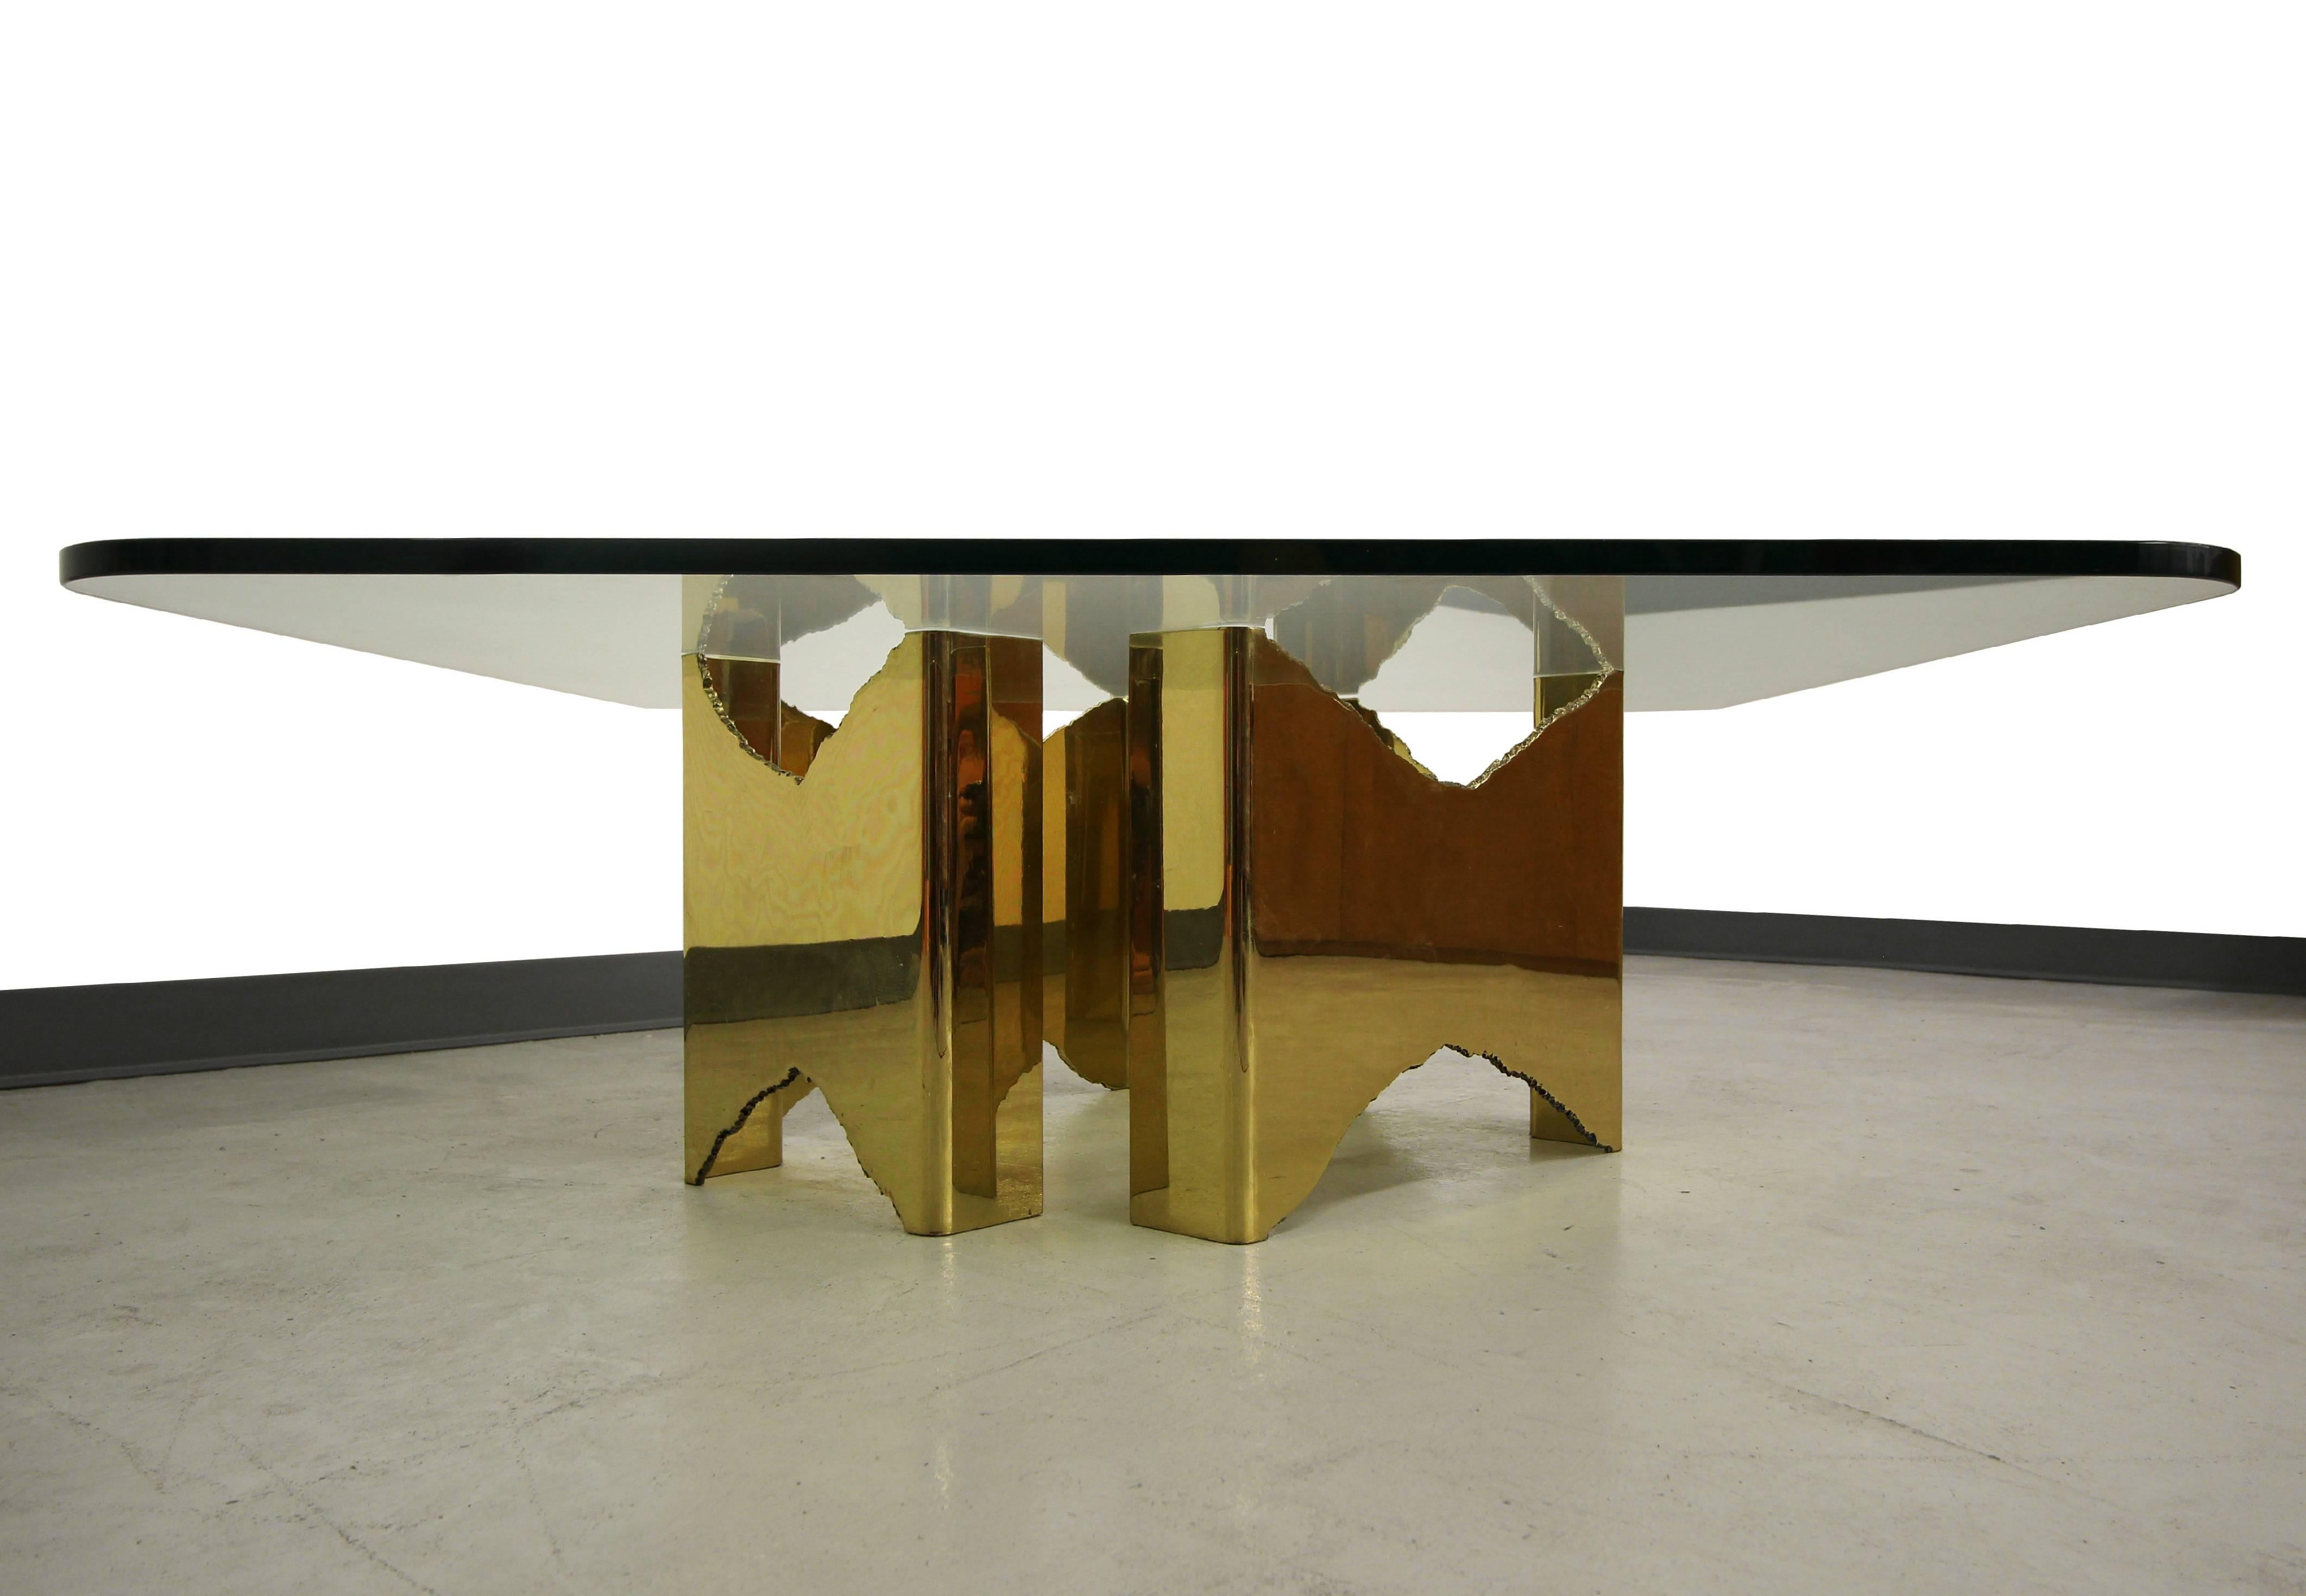 This absolutely stunning SOLID brass coffee table base is a 1 of a kind gem.  The table is comprised of 2 torch cut sections that mirror each other and can be placed in a multitude of positions to create several different table options.  This table